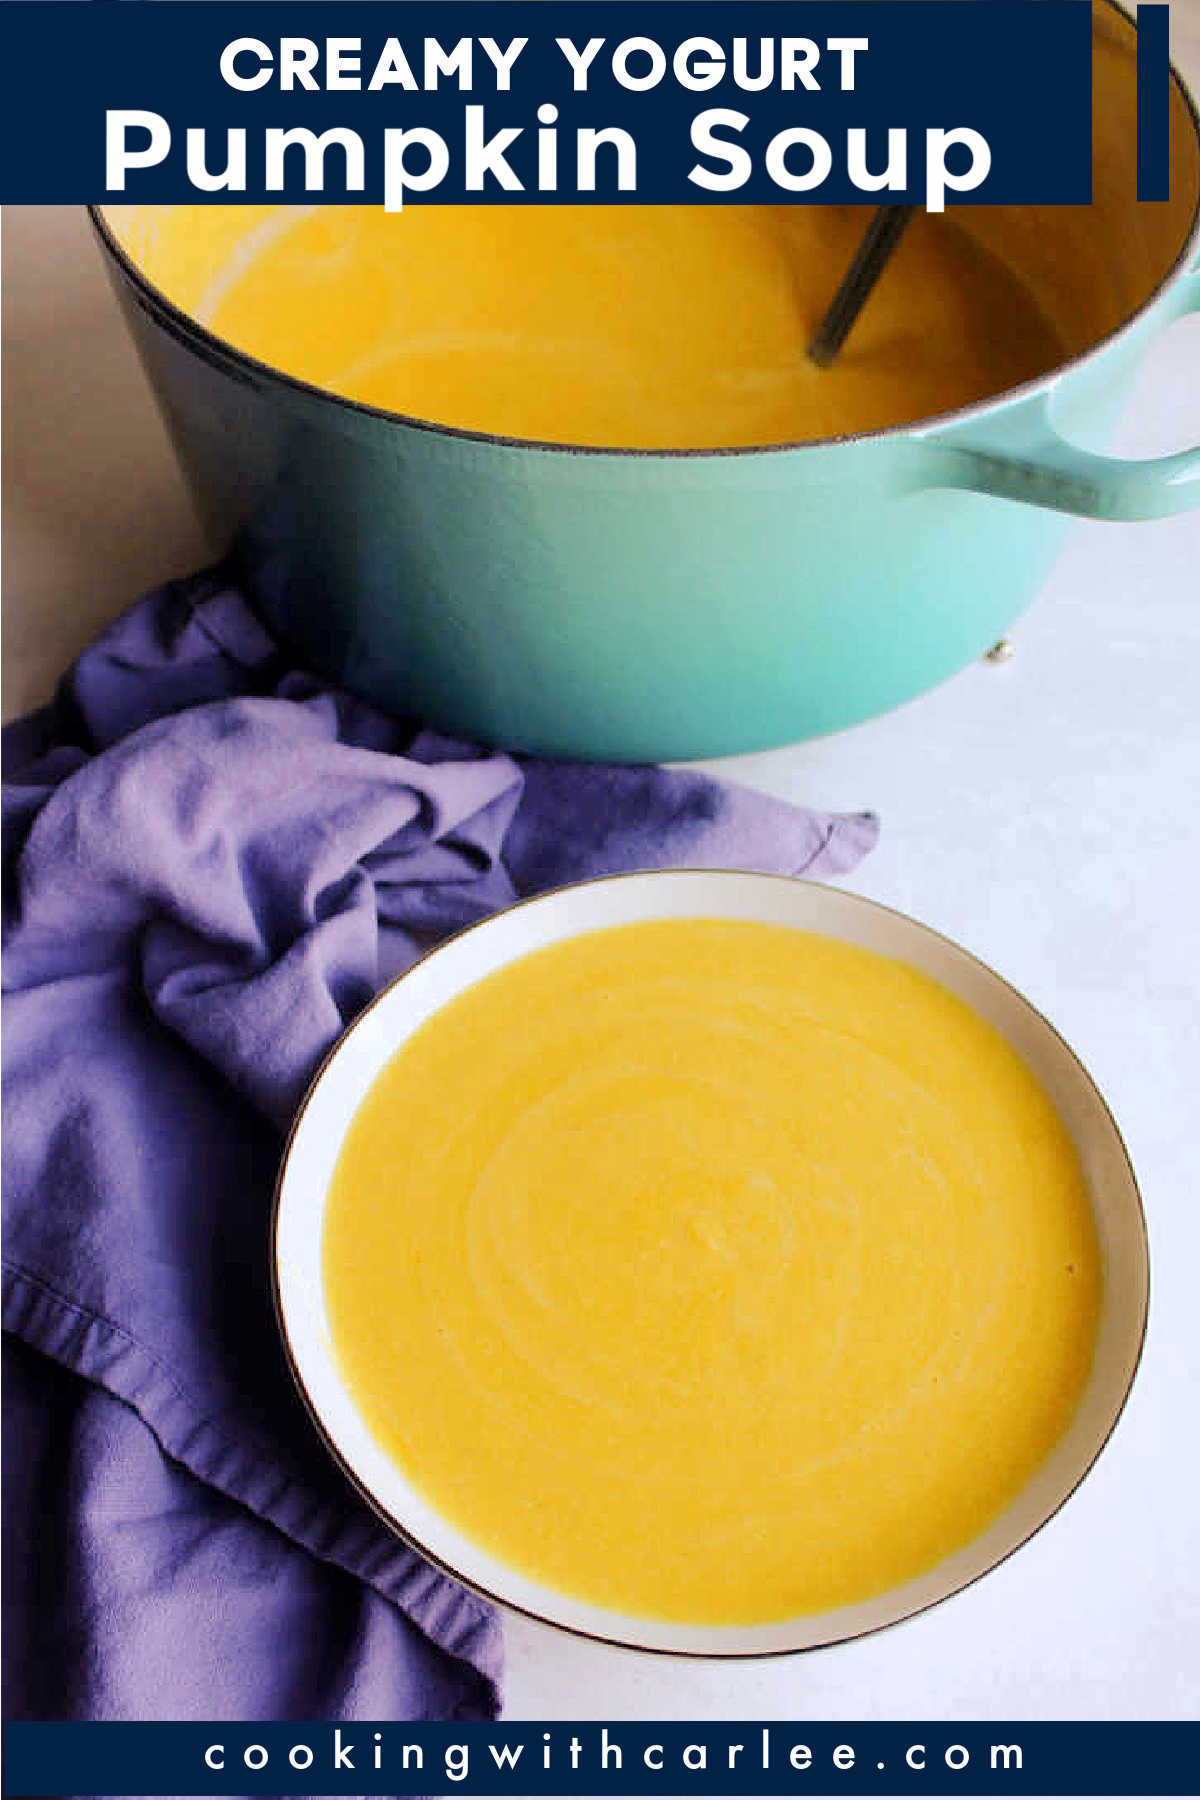 This creamy pumpkin soup is a perfect starter course for a fall meal. Or serve it with a salad or fancy grilled cheese as the star of the meal. It has a smooth creamy texture that is accented by yogurt for a tiny bit of rich tang. You can get creative with the spices, but this recipe is written just the way we love it. You will want to enjoy bowl after bowl all autumn long.